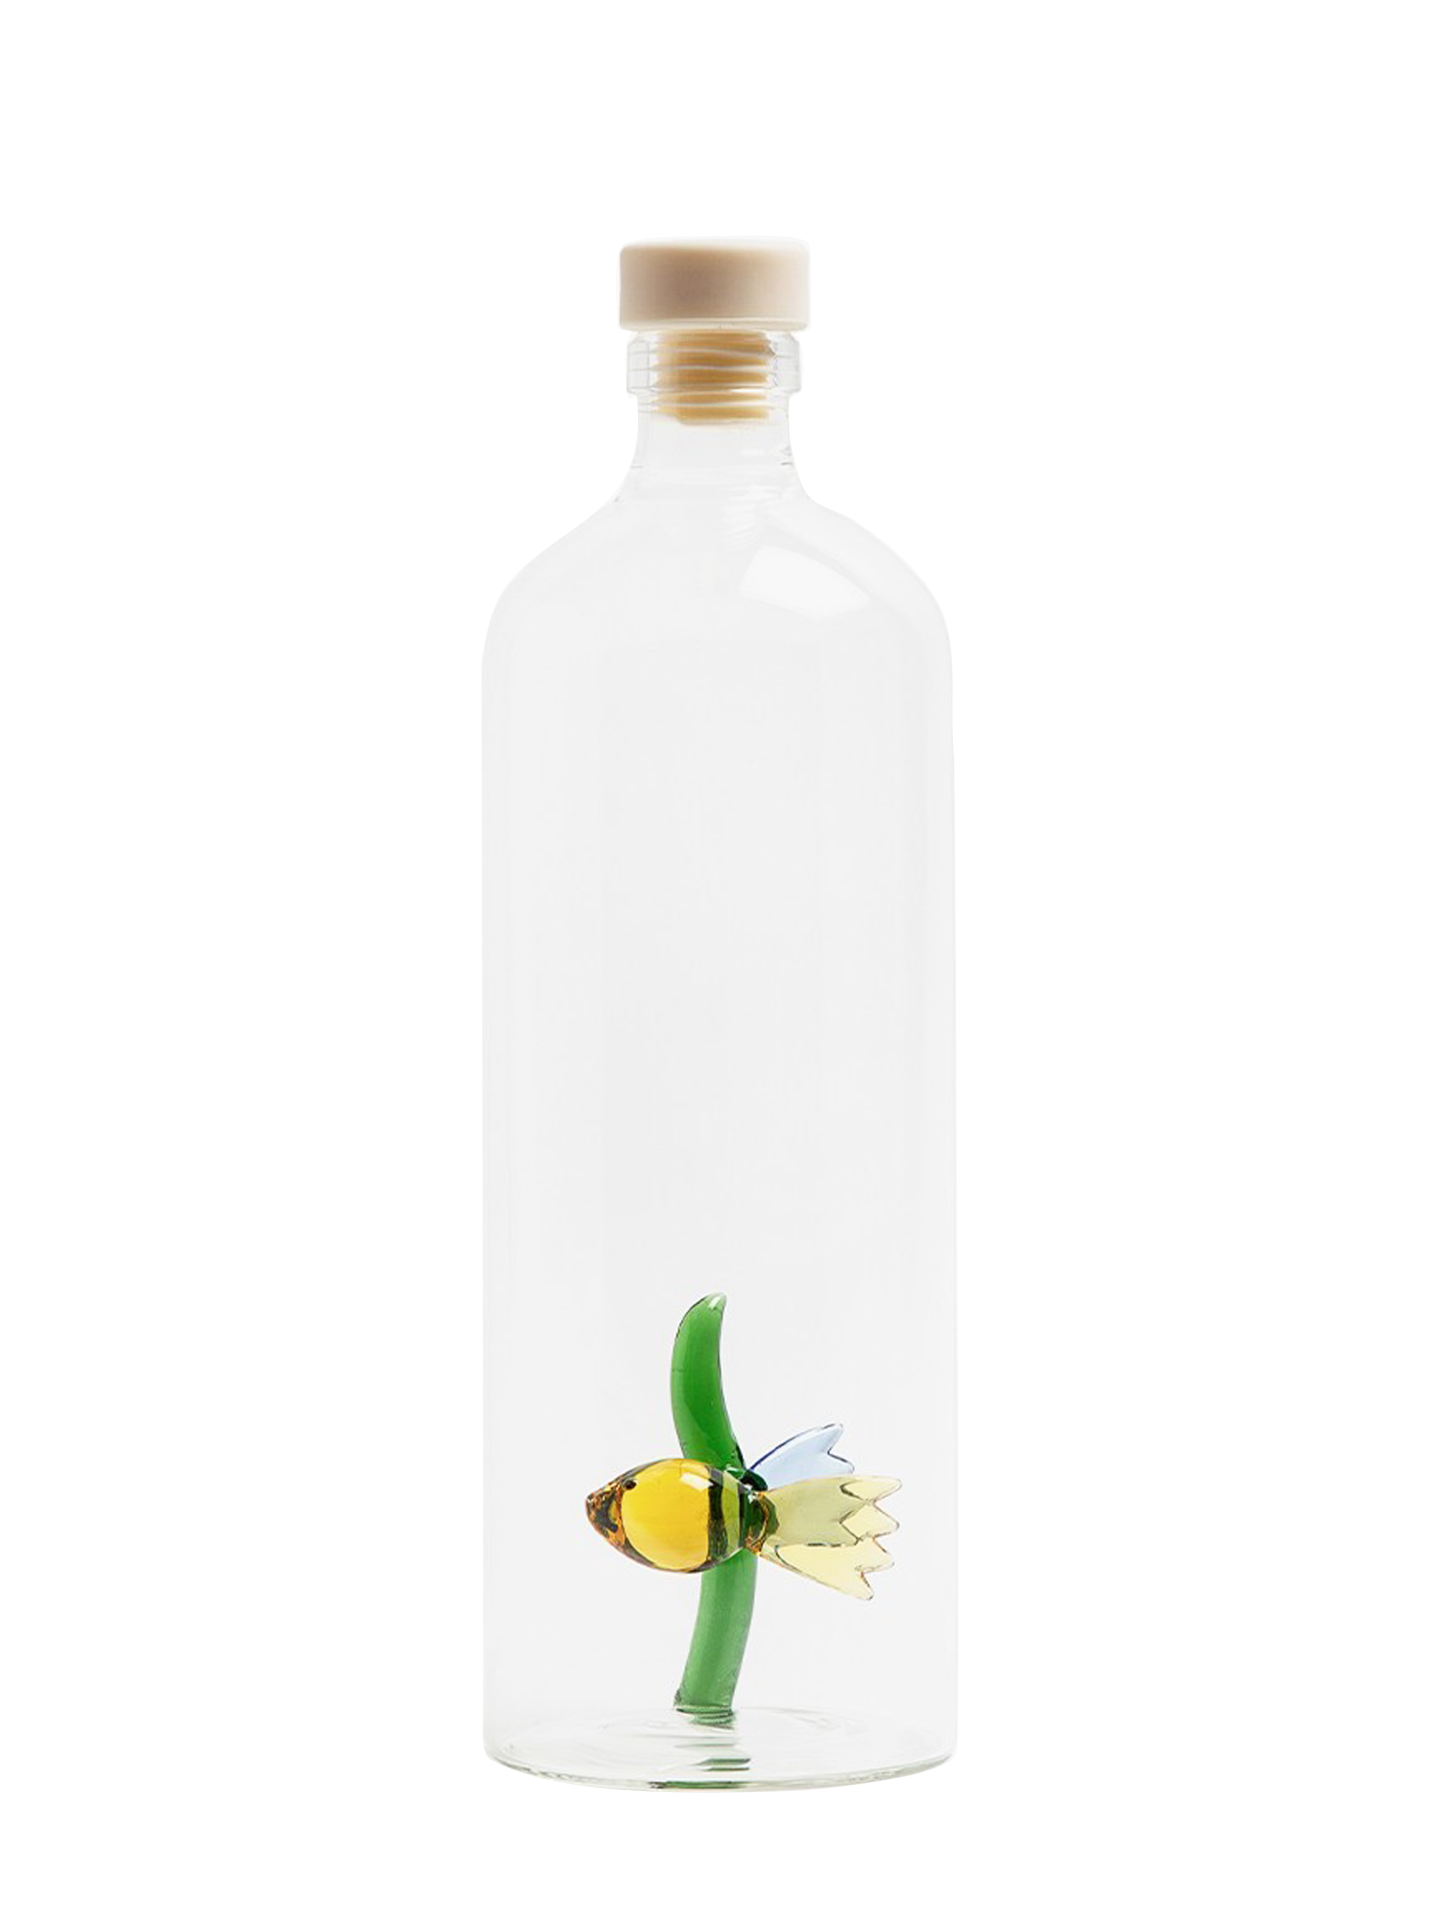 Fish & Seagrass Bottle, Animal Farm Collection